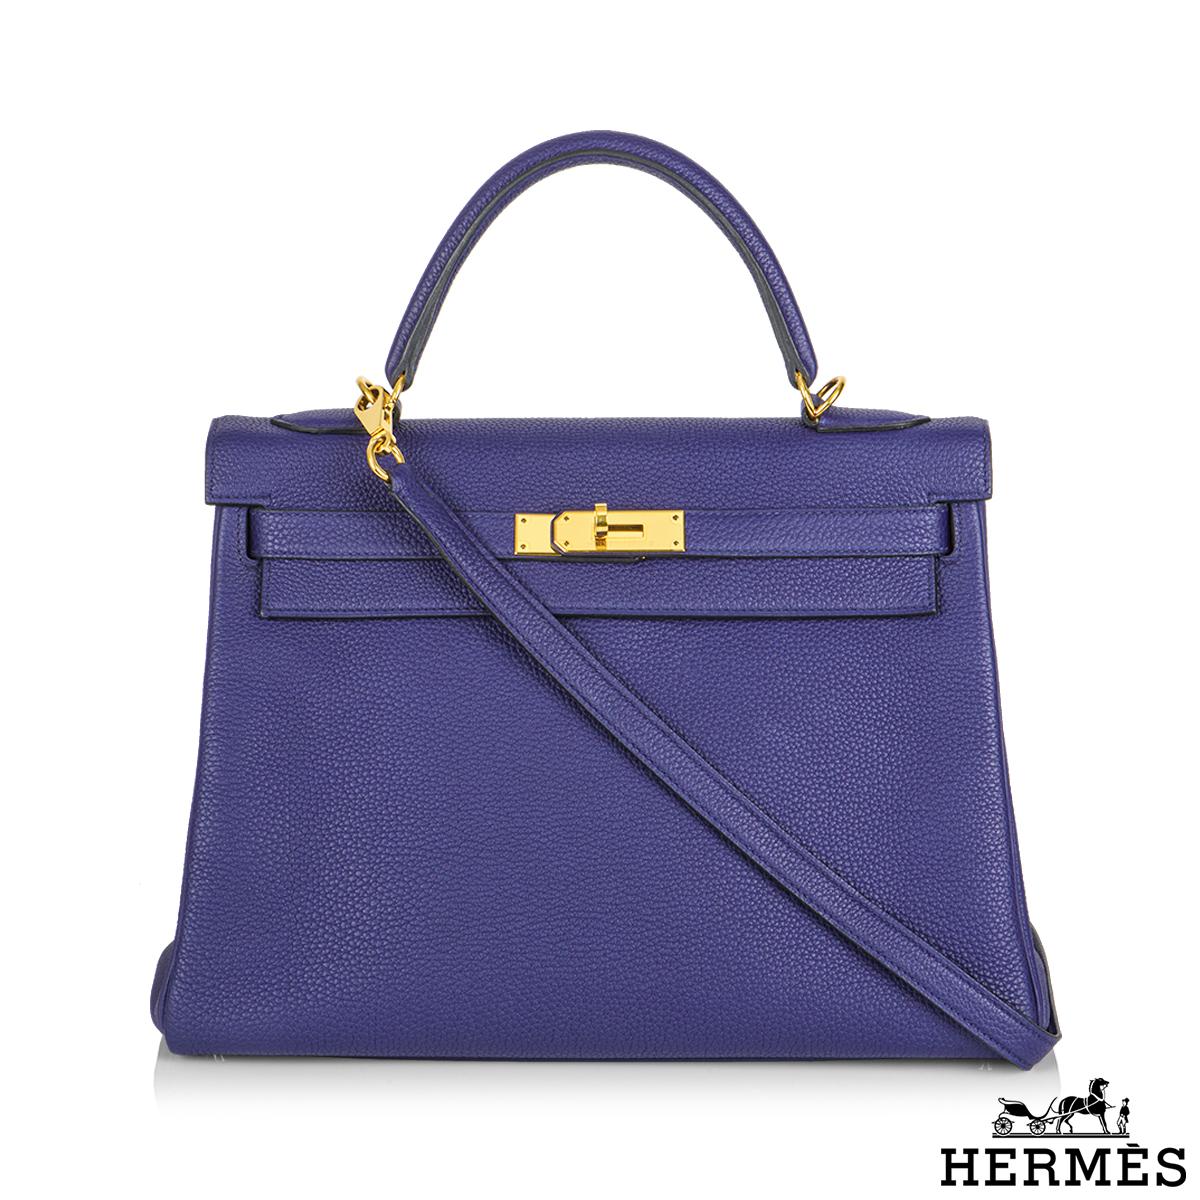 A gorgeous Hermès Kelly 32cm Bleu Encre handbag. The exterior of this Kelly features bleu veau togo leather with gold tone hardware. It has a front toggle closure, a single rolled handle, and tonal stitching. The interior is lined with bleu veau